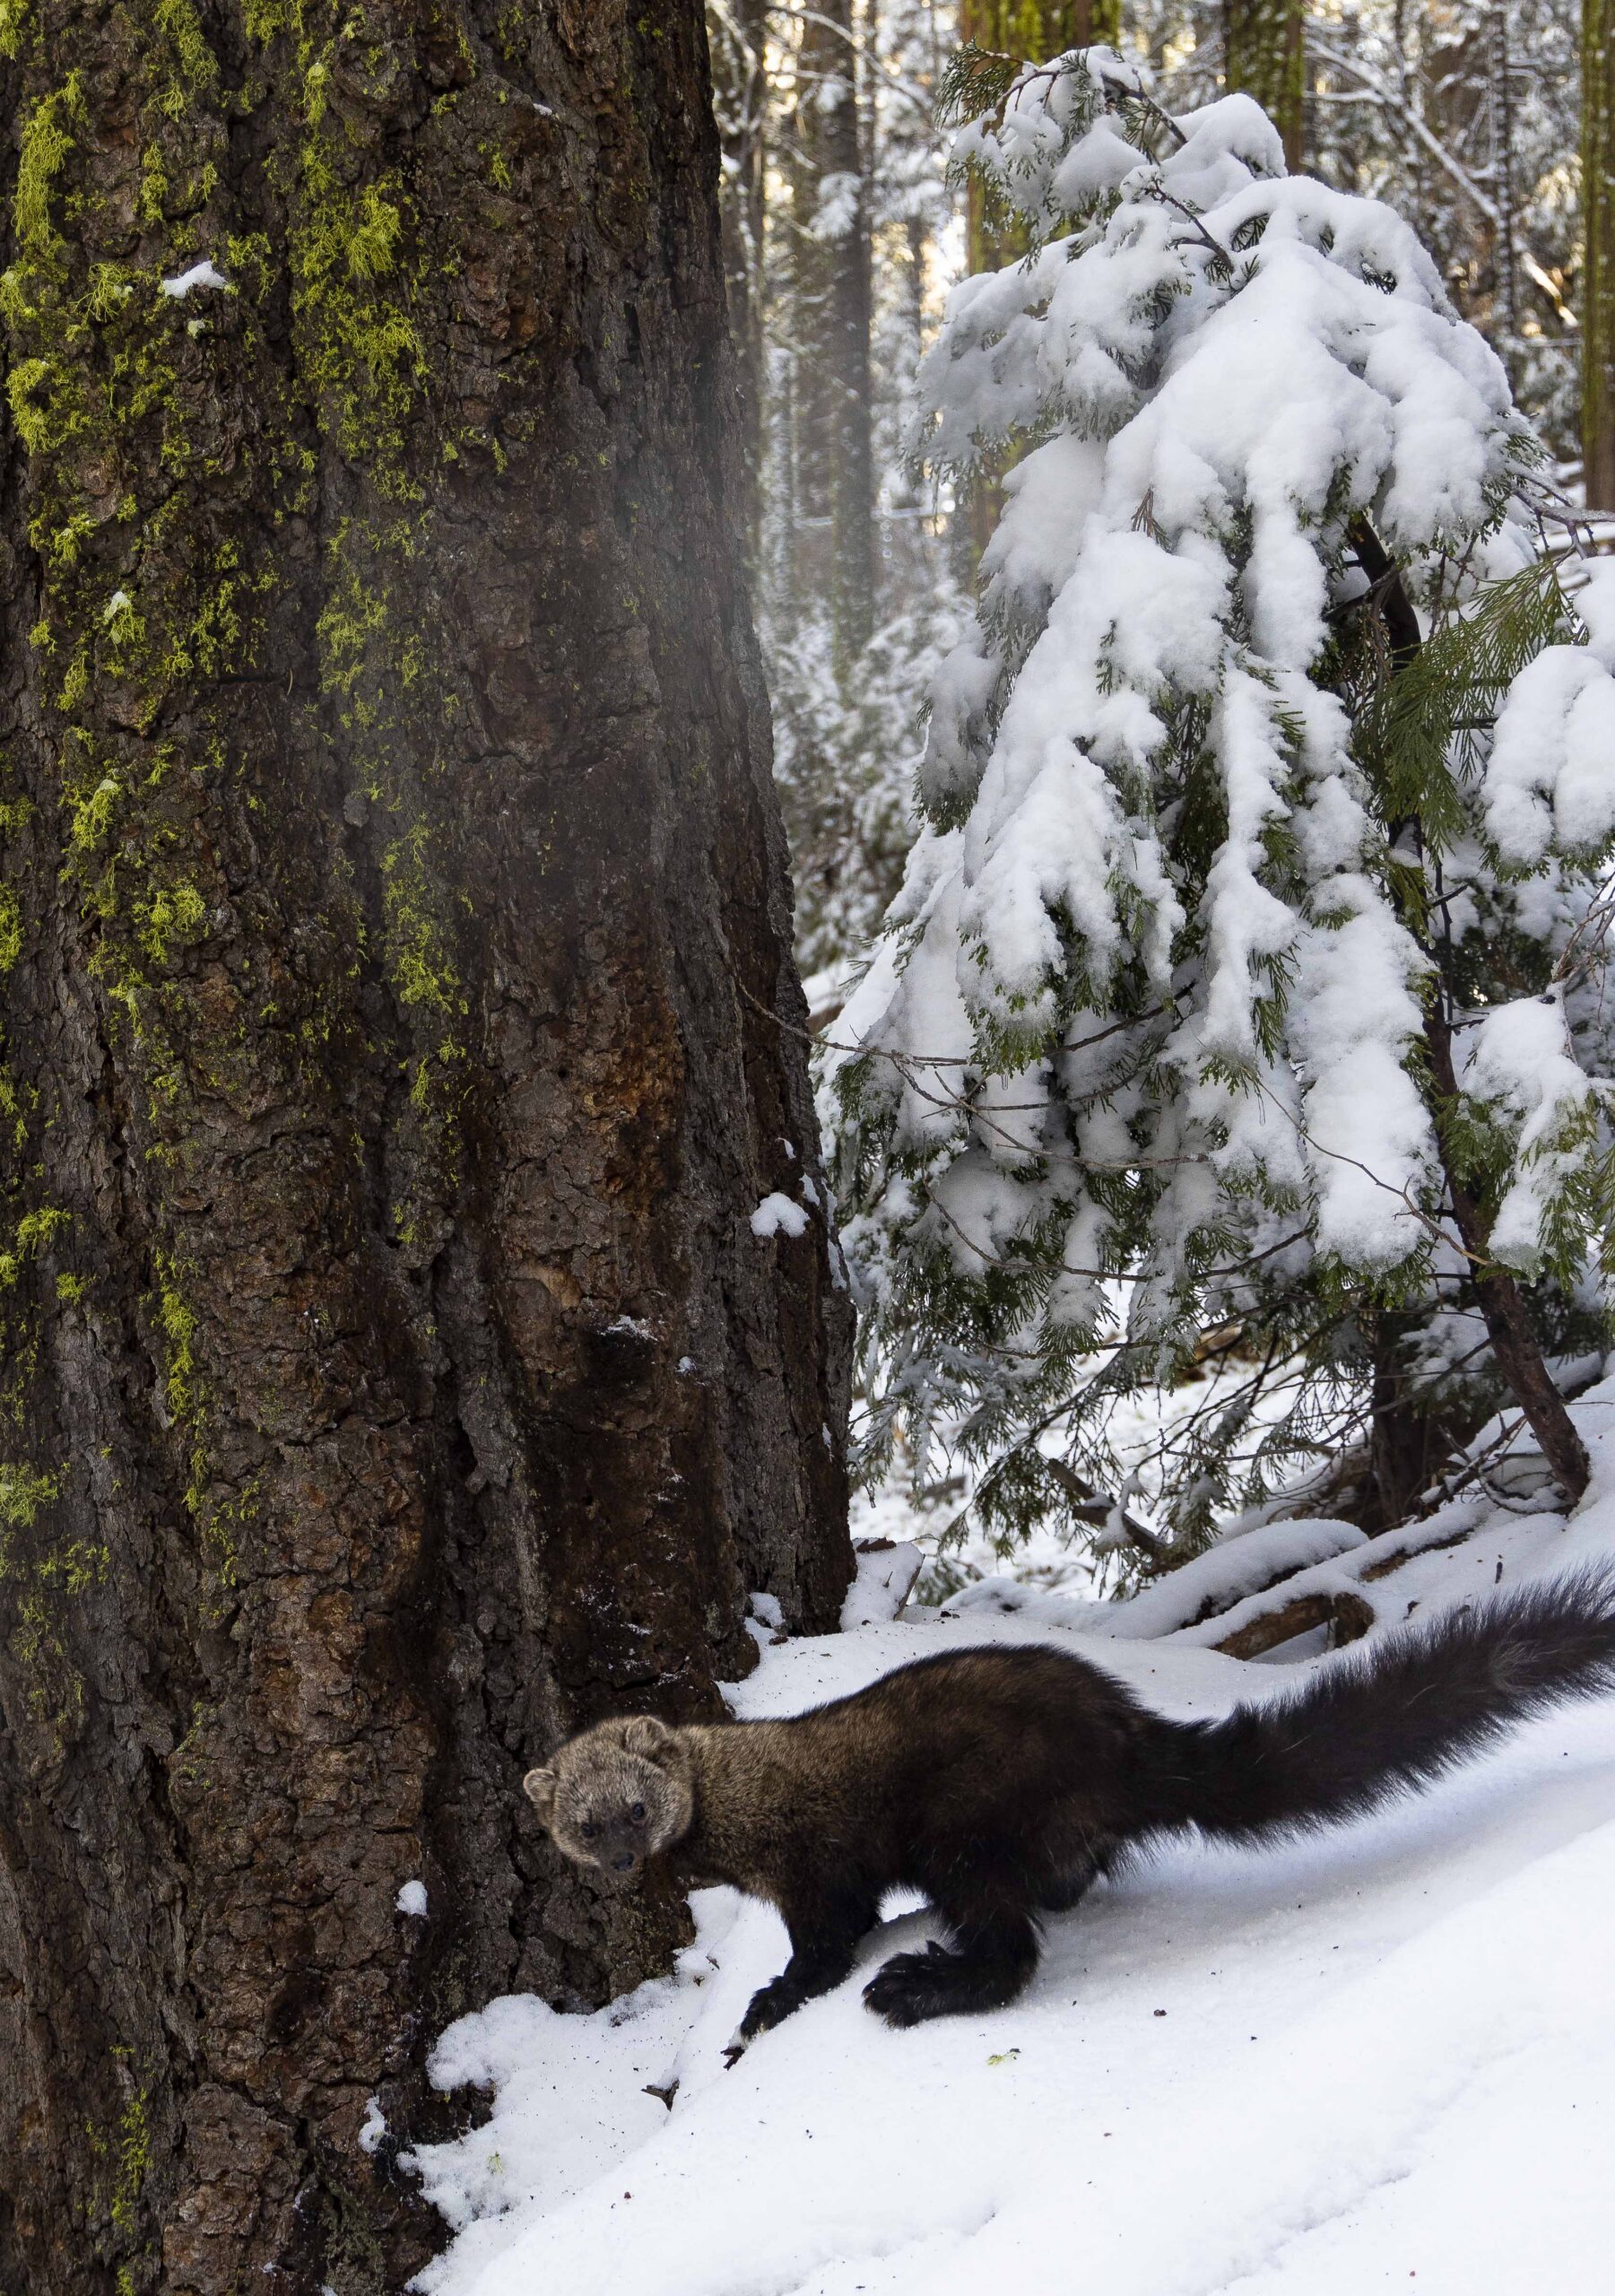 A Pacific fisher surveys the snow at the base of her den tree. Part of the mustelid family, the population of the elusive Pacific fisher in Yosemite is endangered. Learn more from researchers surveying fishers in this story. Image: Robb Hirsch. 